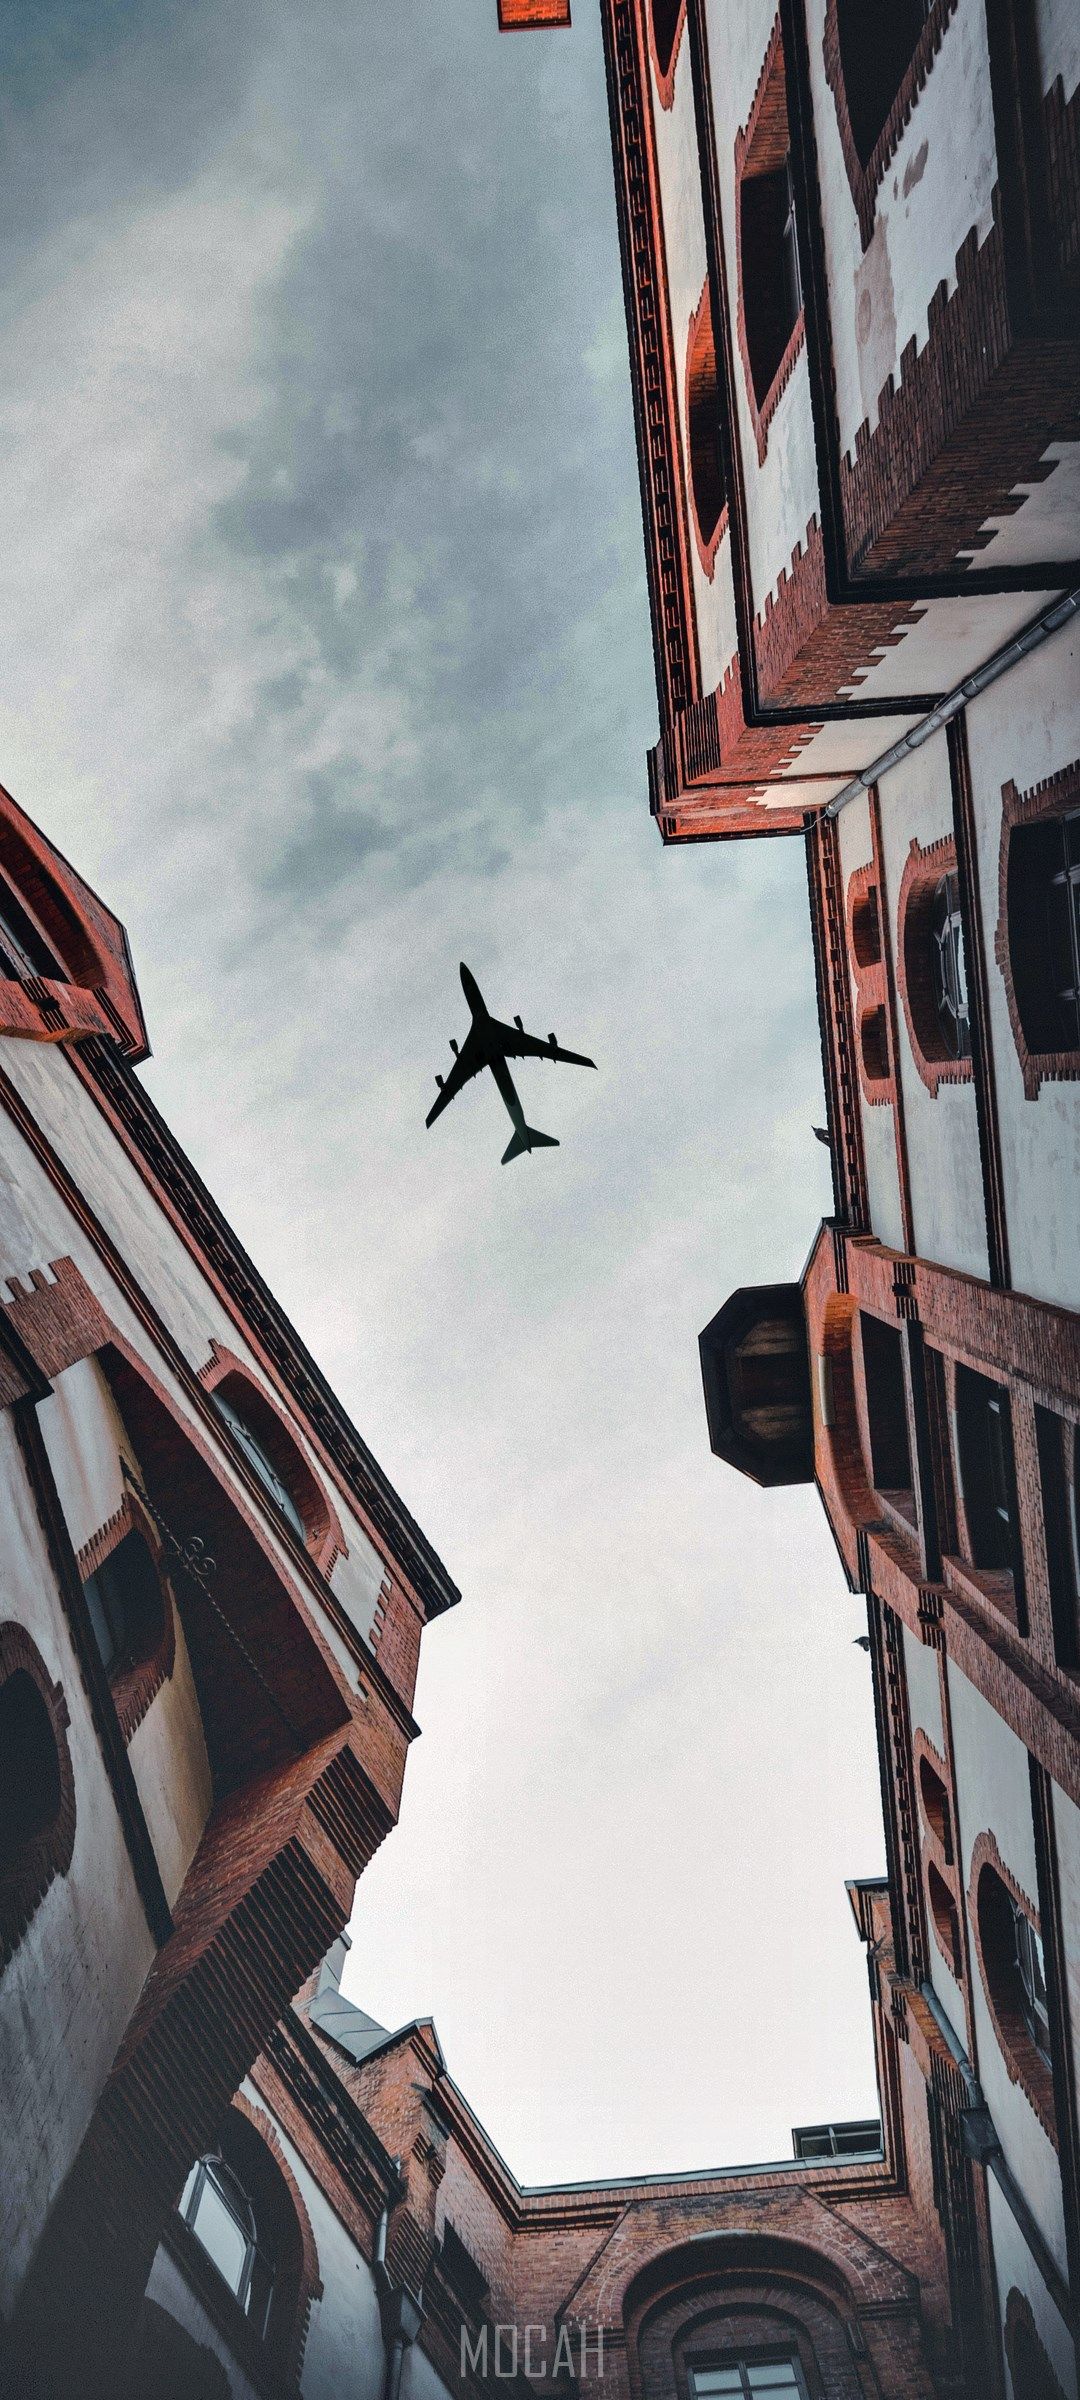 A plane flying over some buildings - Architecture, airplane